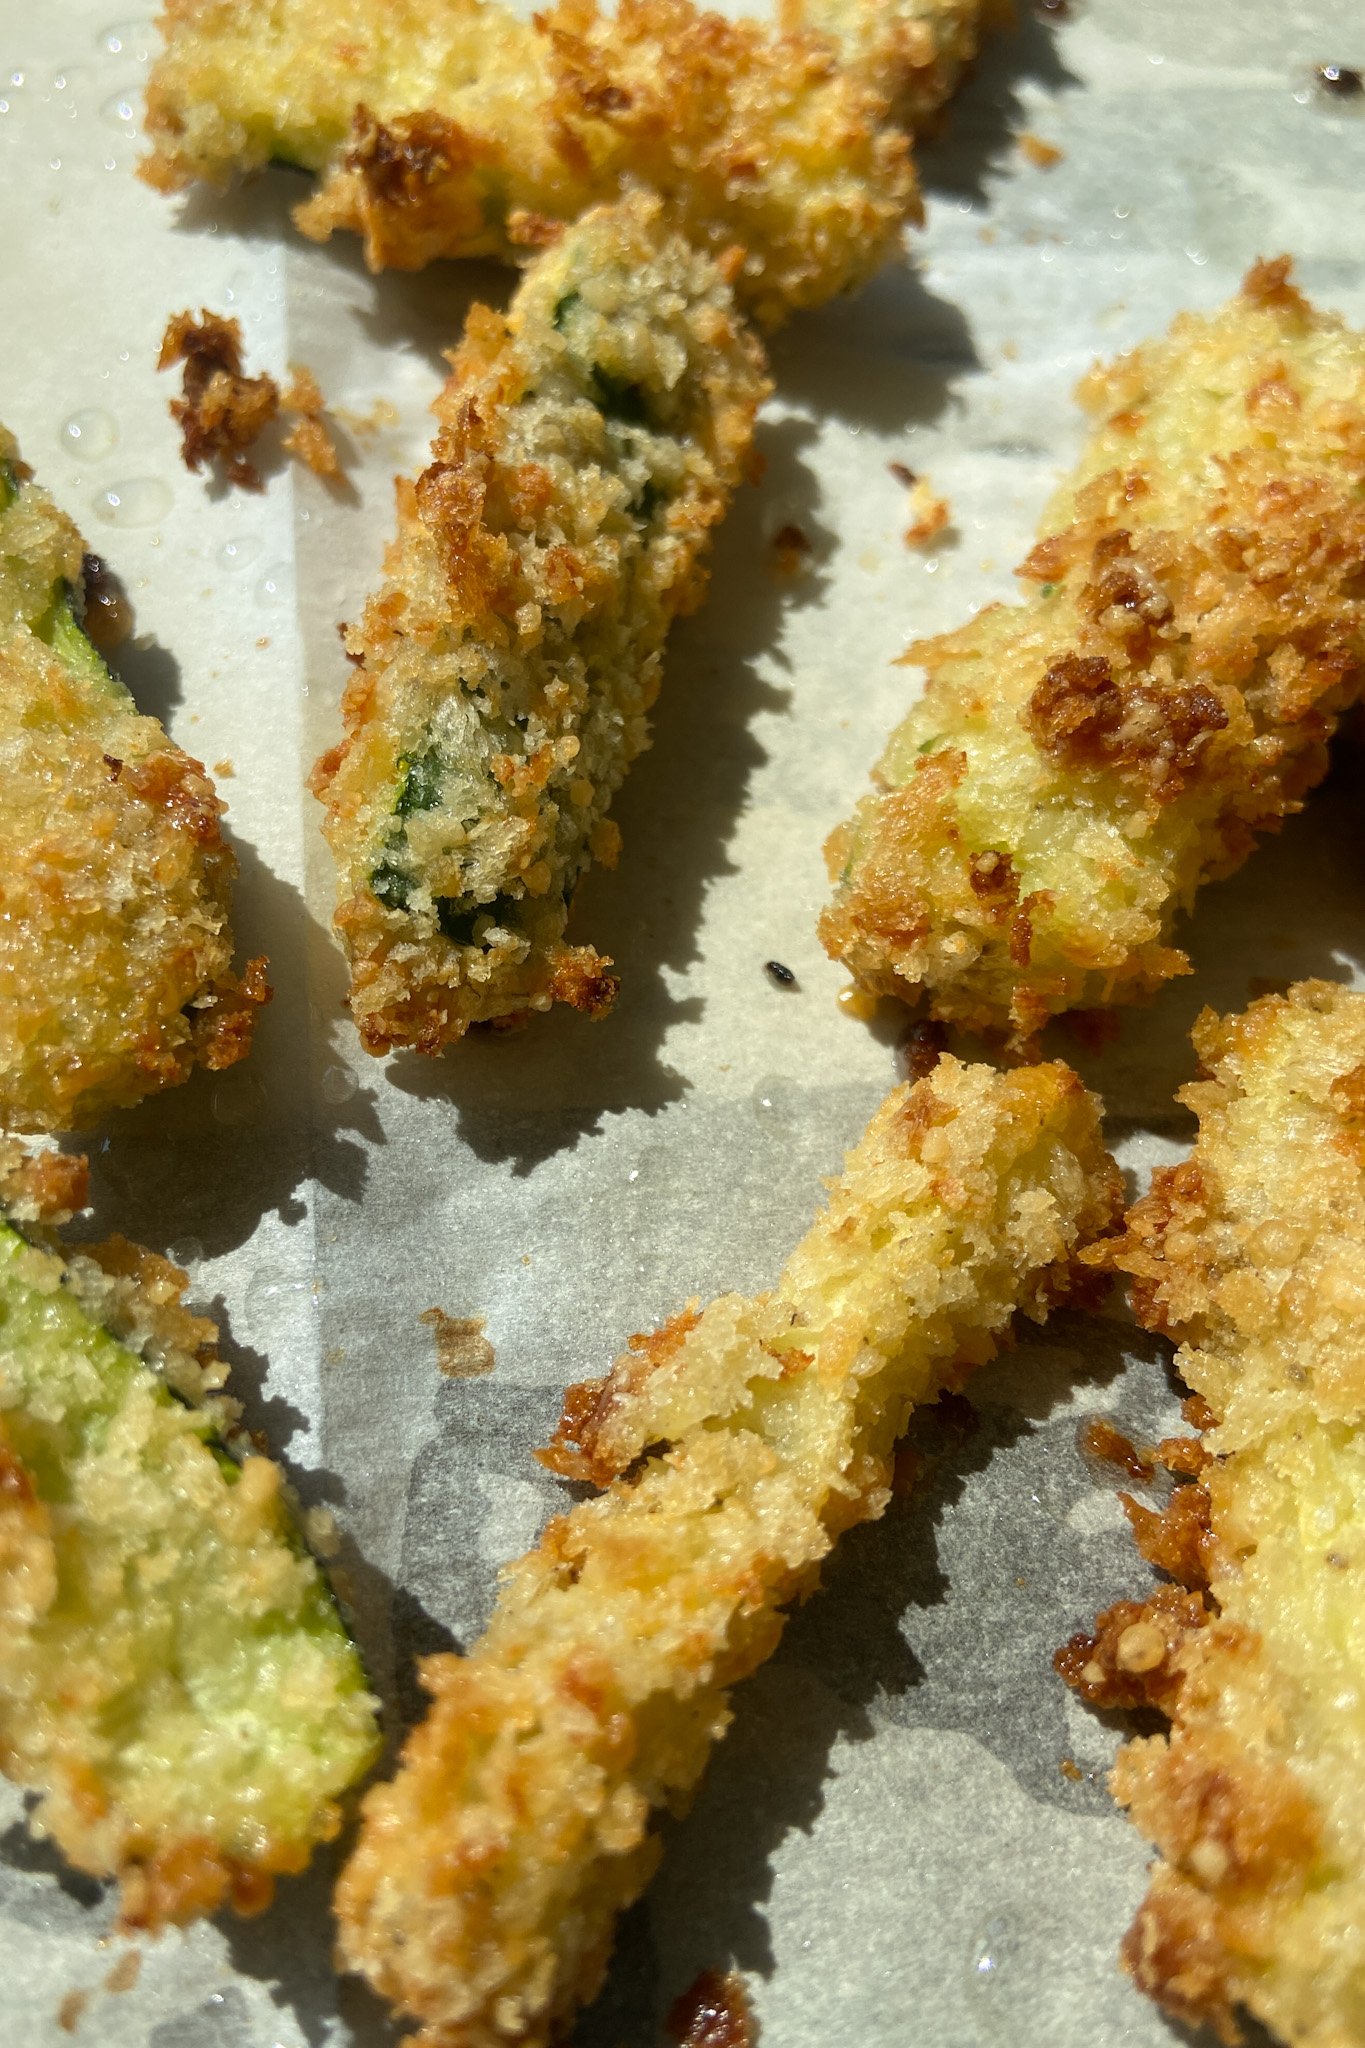 Zucchini fries freshly cooked